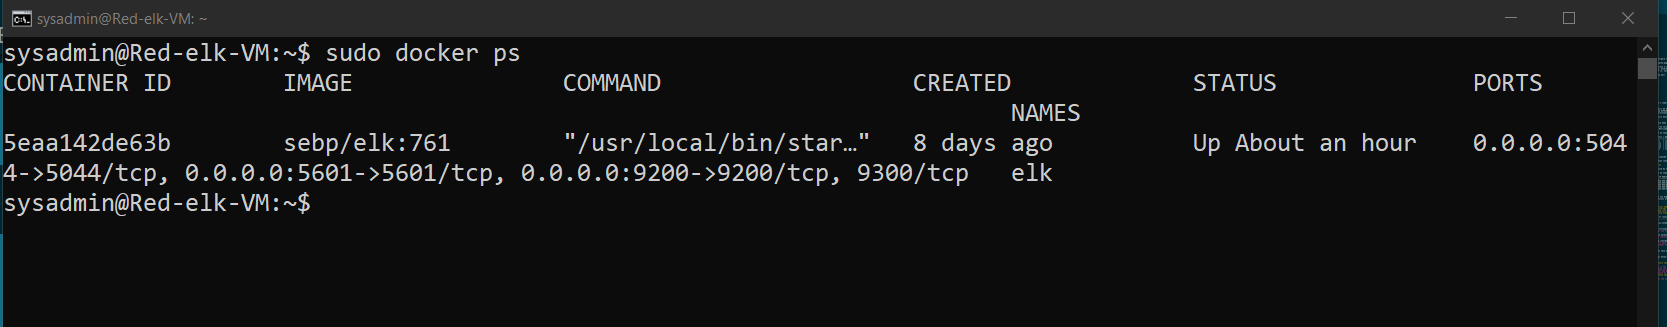 docker_ps_output.png